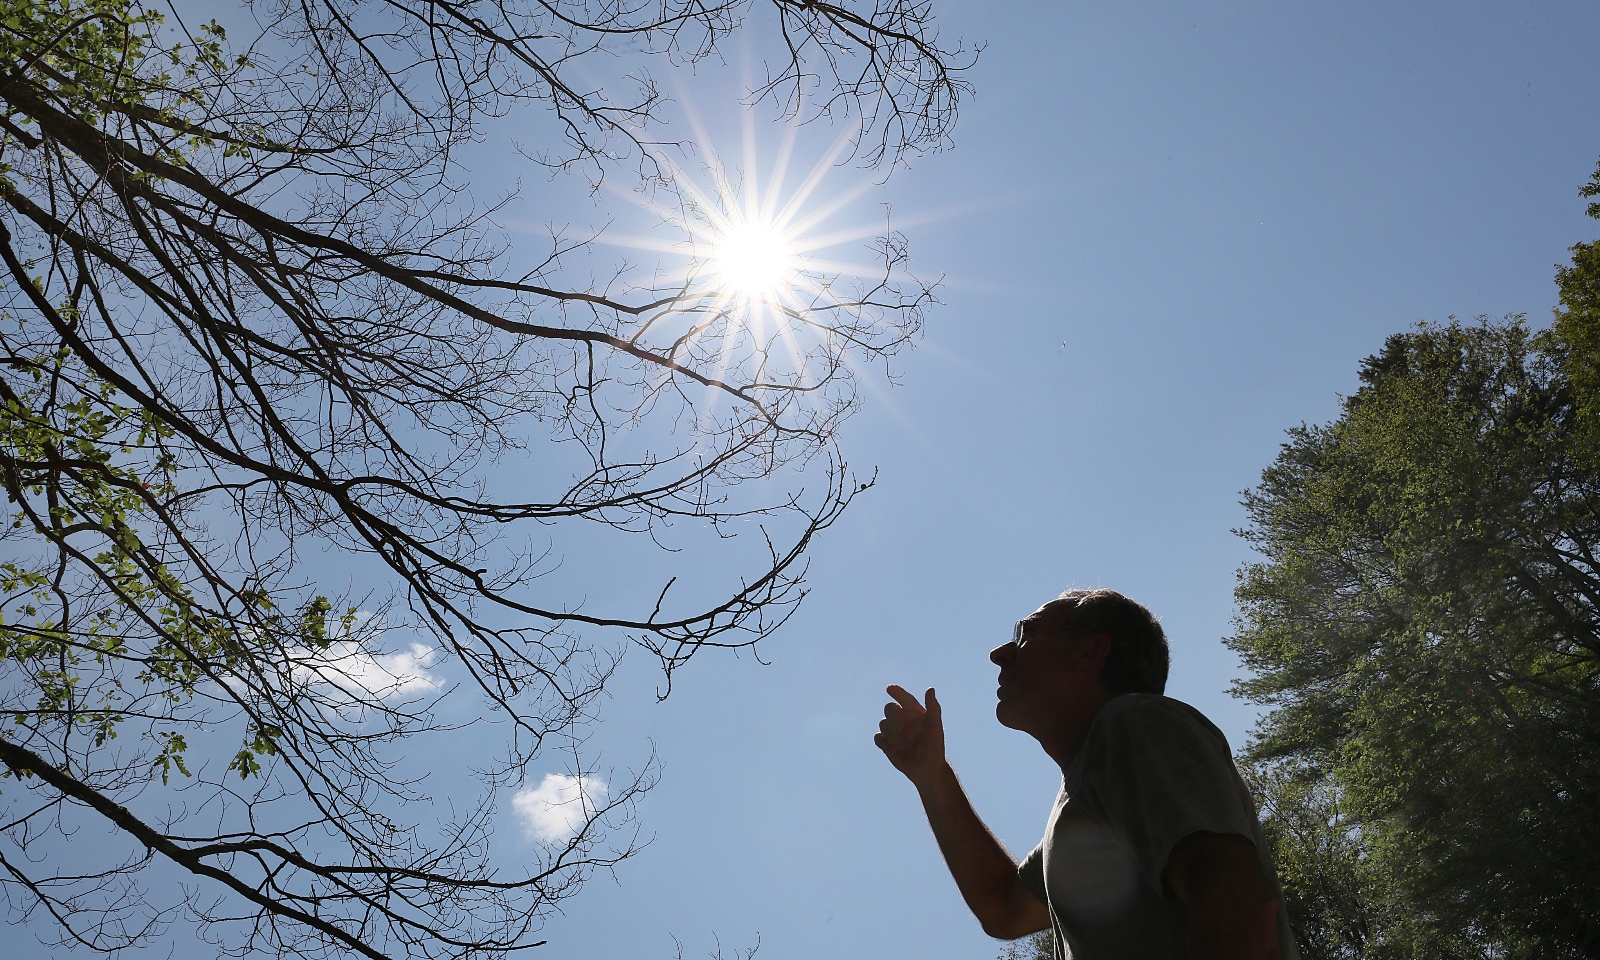 The sun shines against a blue sky as a man looks up at a tree that is barren of leaves at its tips.